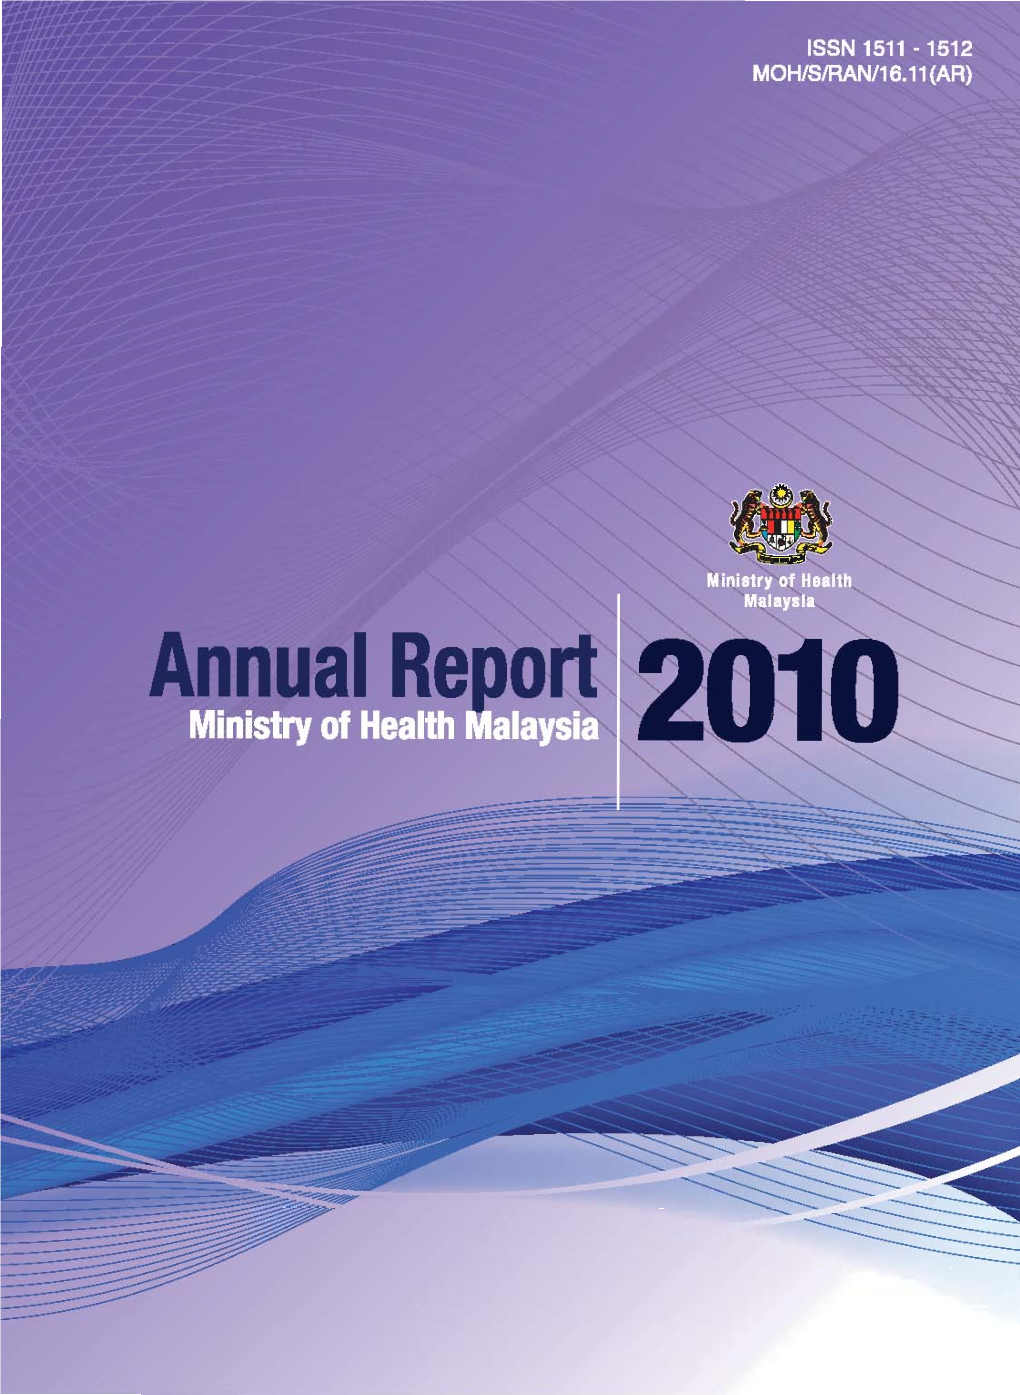 Annual Report Ministry of Health Malaysia